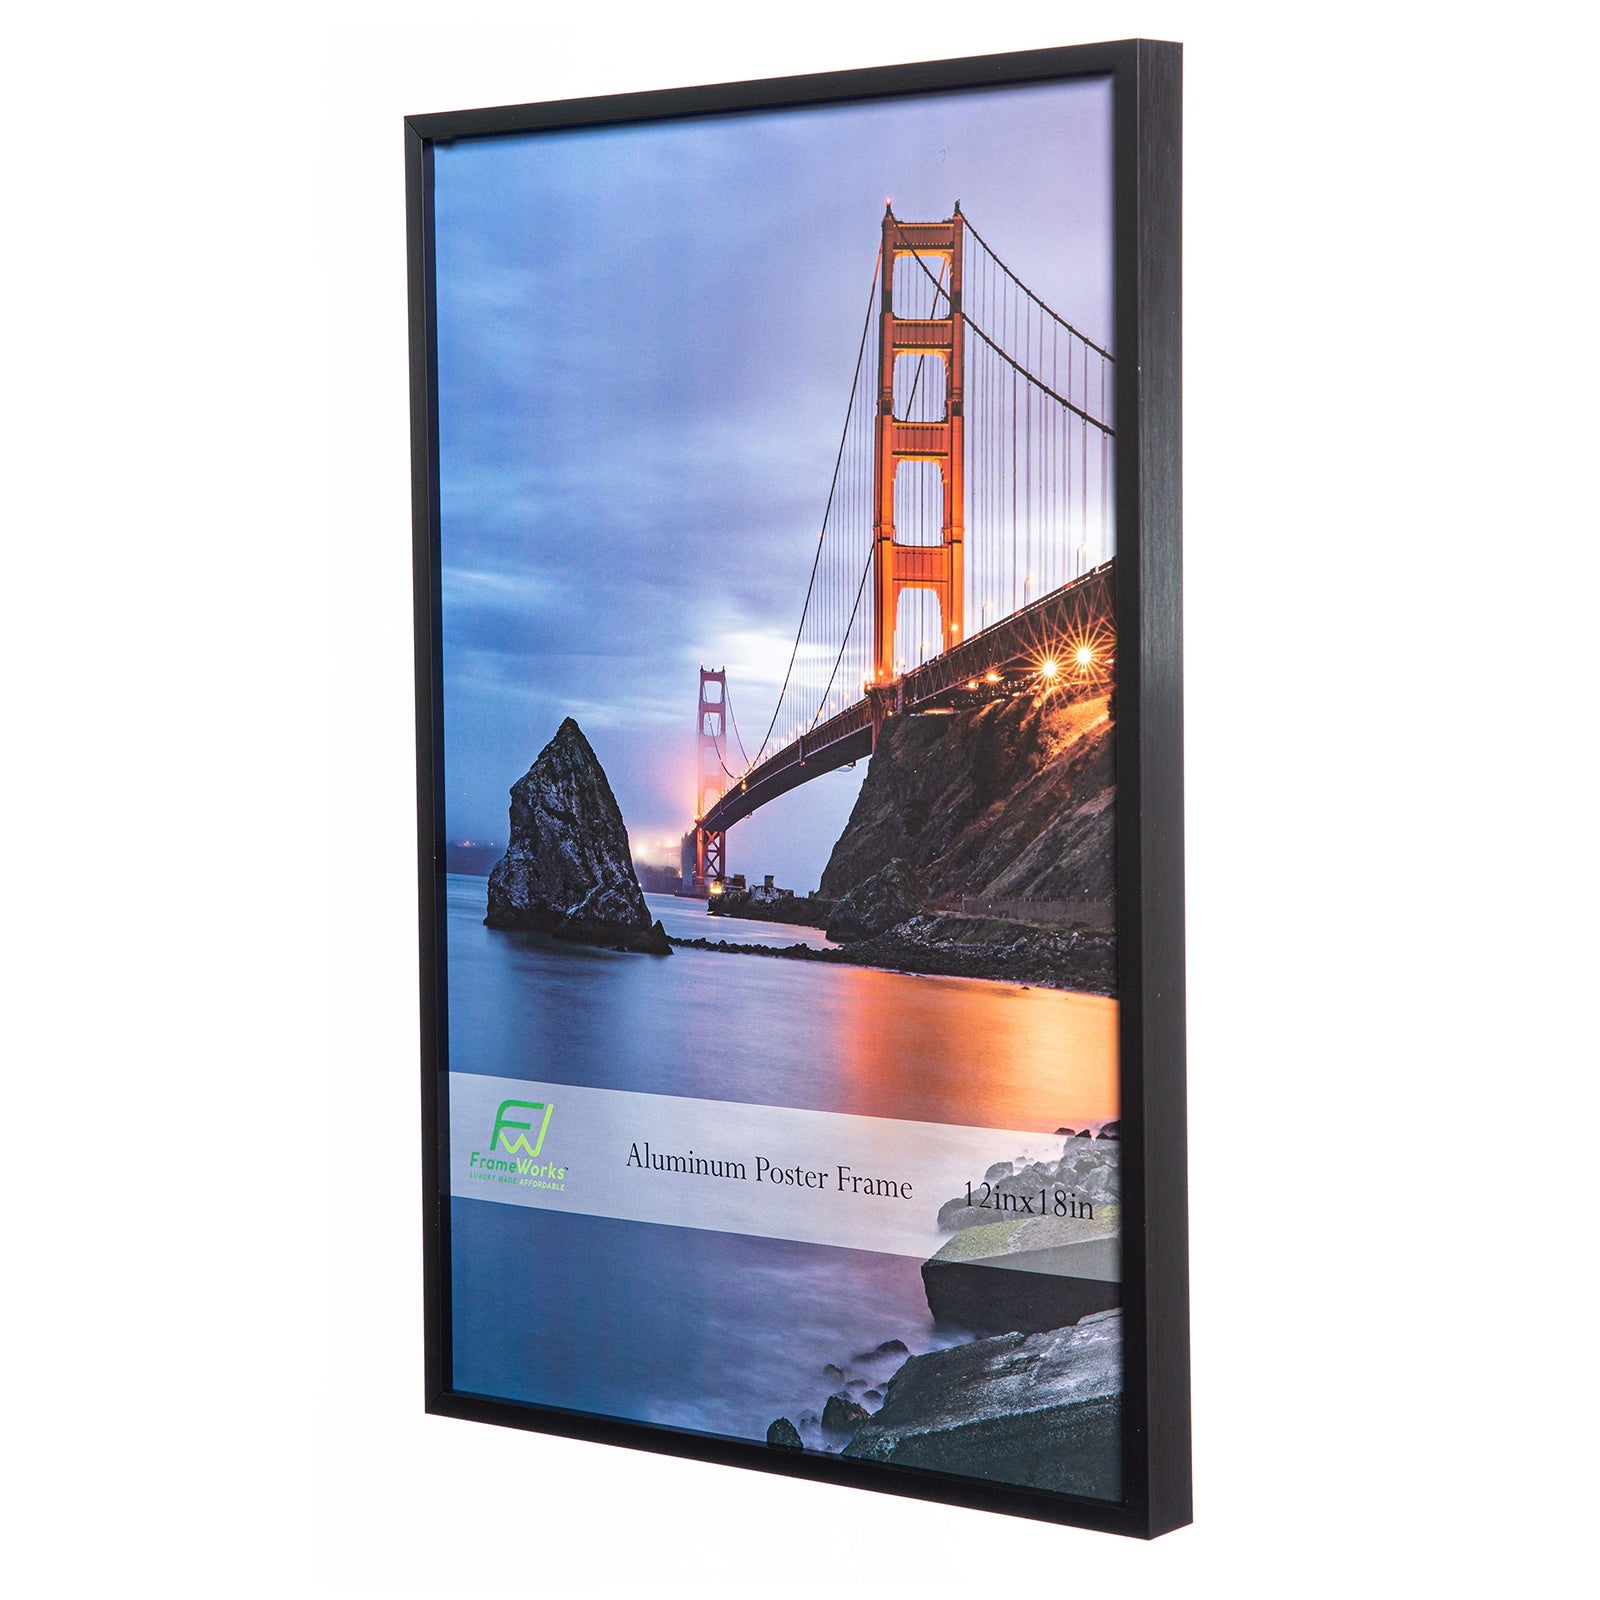 12" x 18" Black Brushed Aluminum Poster Picture Frame with Plexiglass